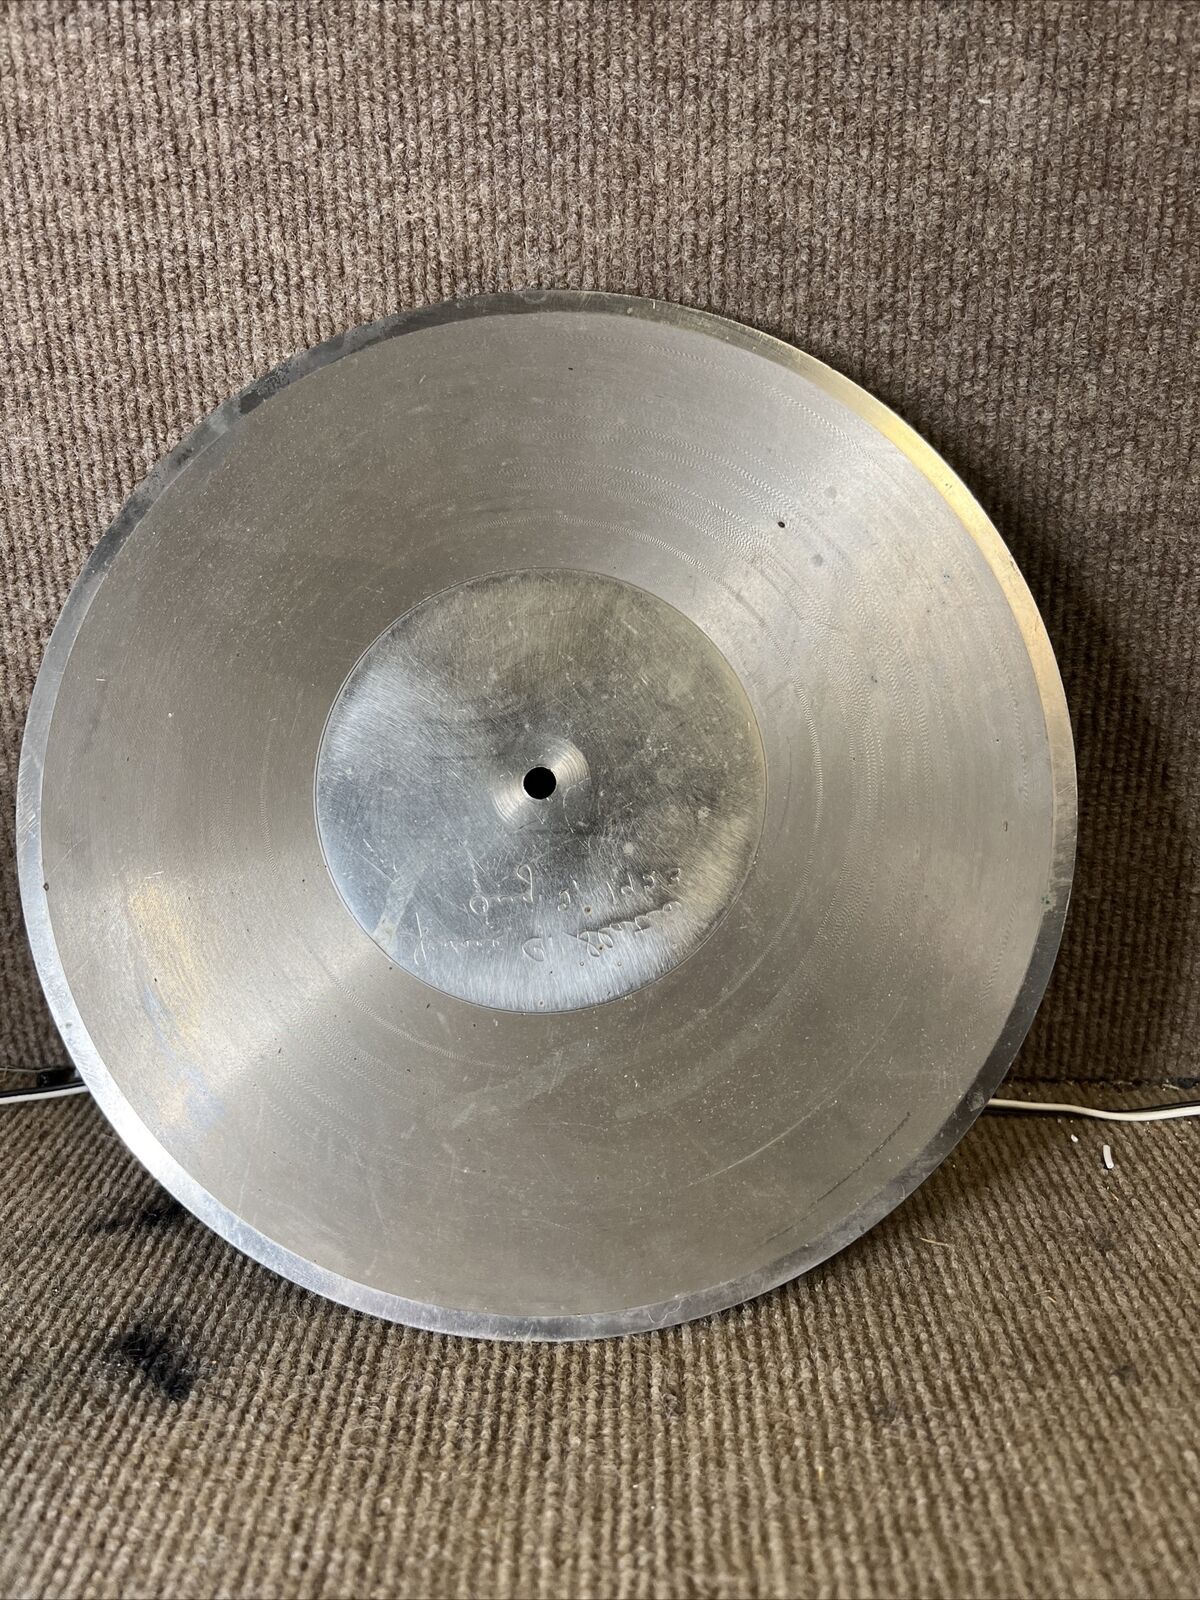 78 rpm Metal Master Mother Matrix Stamper 10” Record from 1923